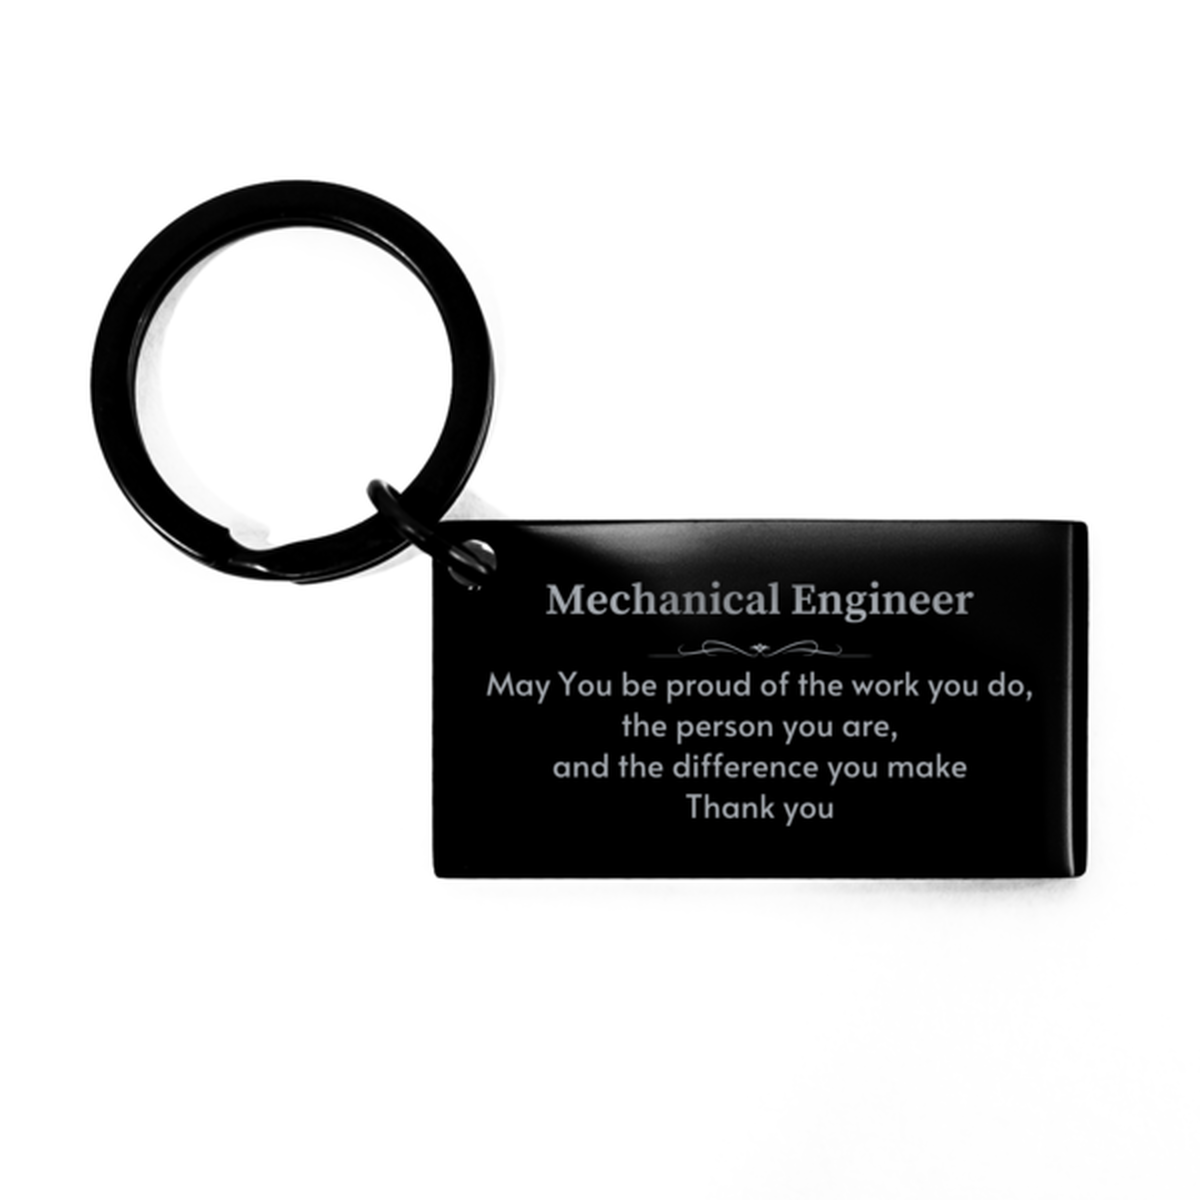 Heartwarming Keychain Retirement Coworkers Gifts for Mechanical Engineer, Operations Manager May You be proud of the work you do, the person you are Gifts for Boss Men Women Friends